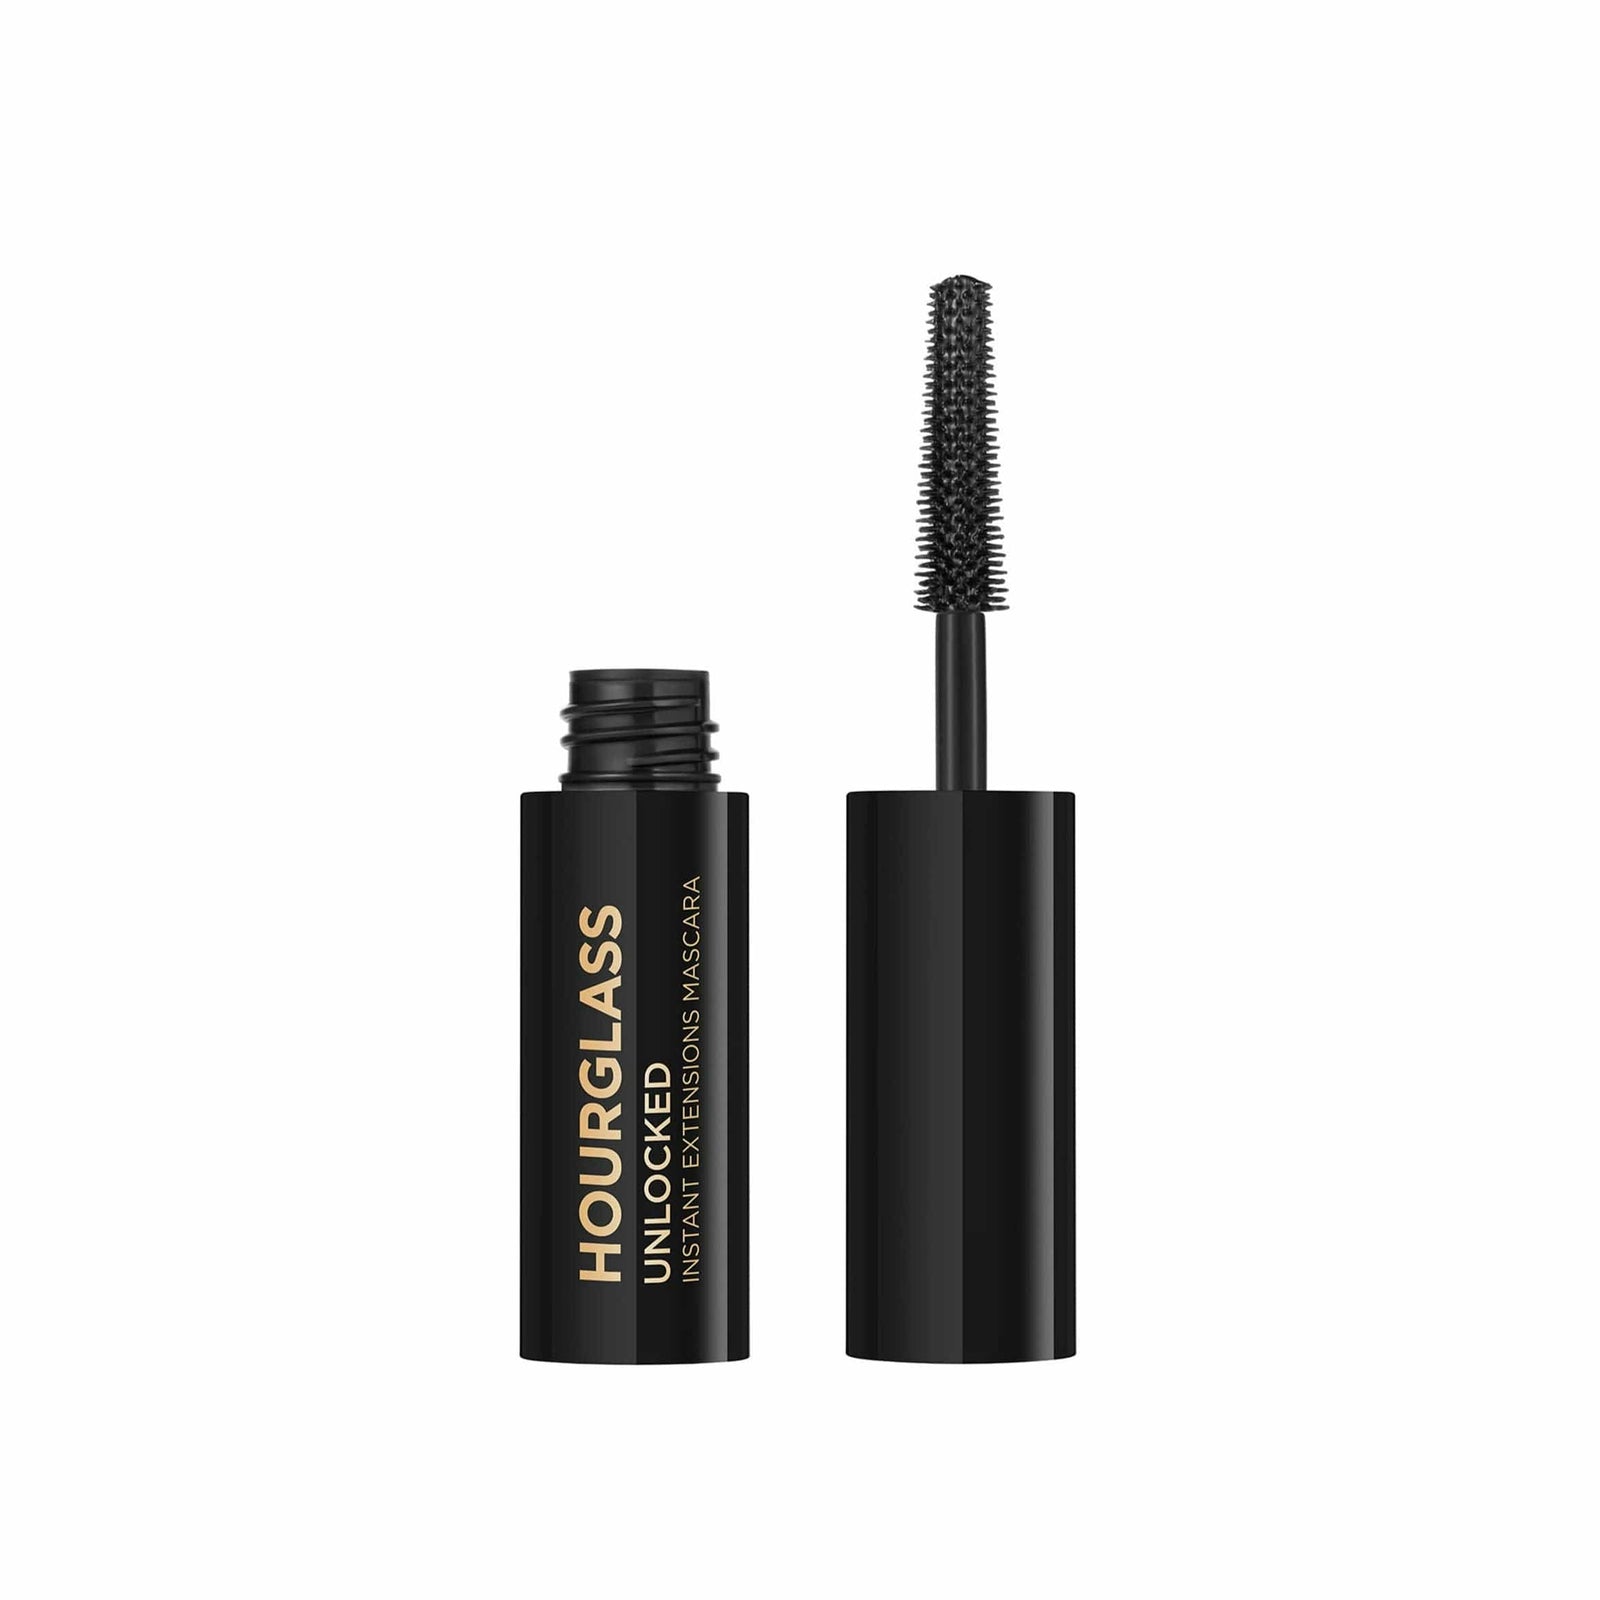 Hourglass Unlocked Instant Extensions Mascara Travel Ultra Black